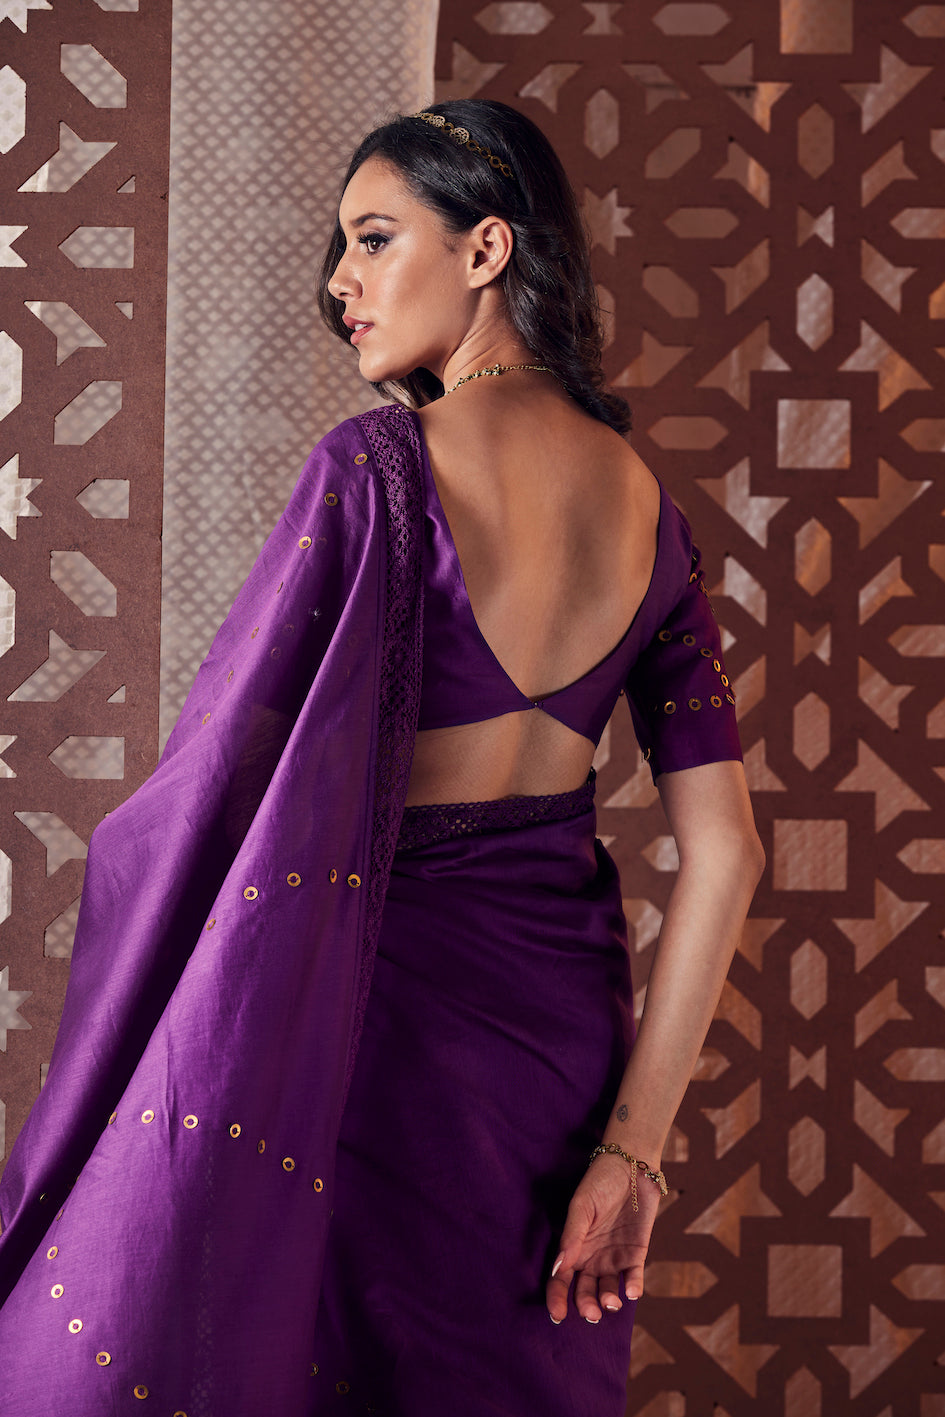 Purple Chanderi Saree - Set of 2 at Kamakhyaa by Charkhee. This item is Chanderi, Cotton, Embroidered, Ethnic Wear, Indian Wear, Naayaab, Natural, Nayaab, Purple, Relaxed Fit, Saree Sets, Womenswear